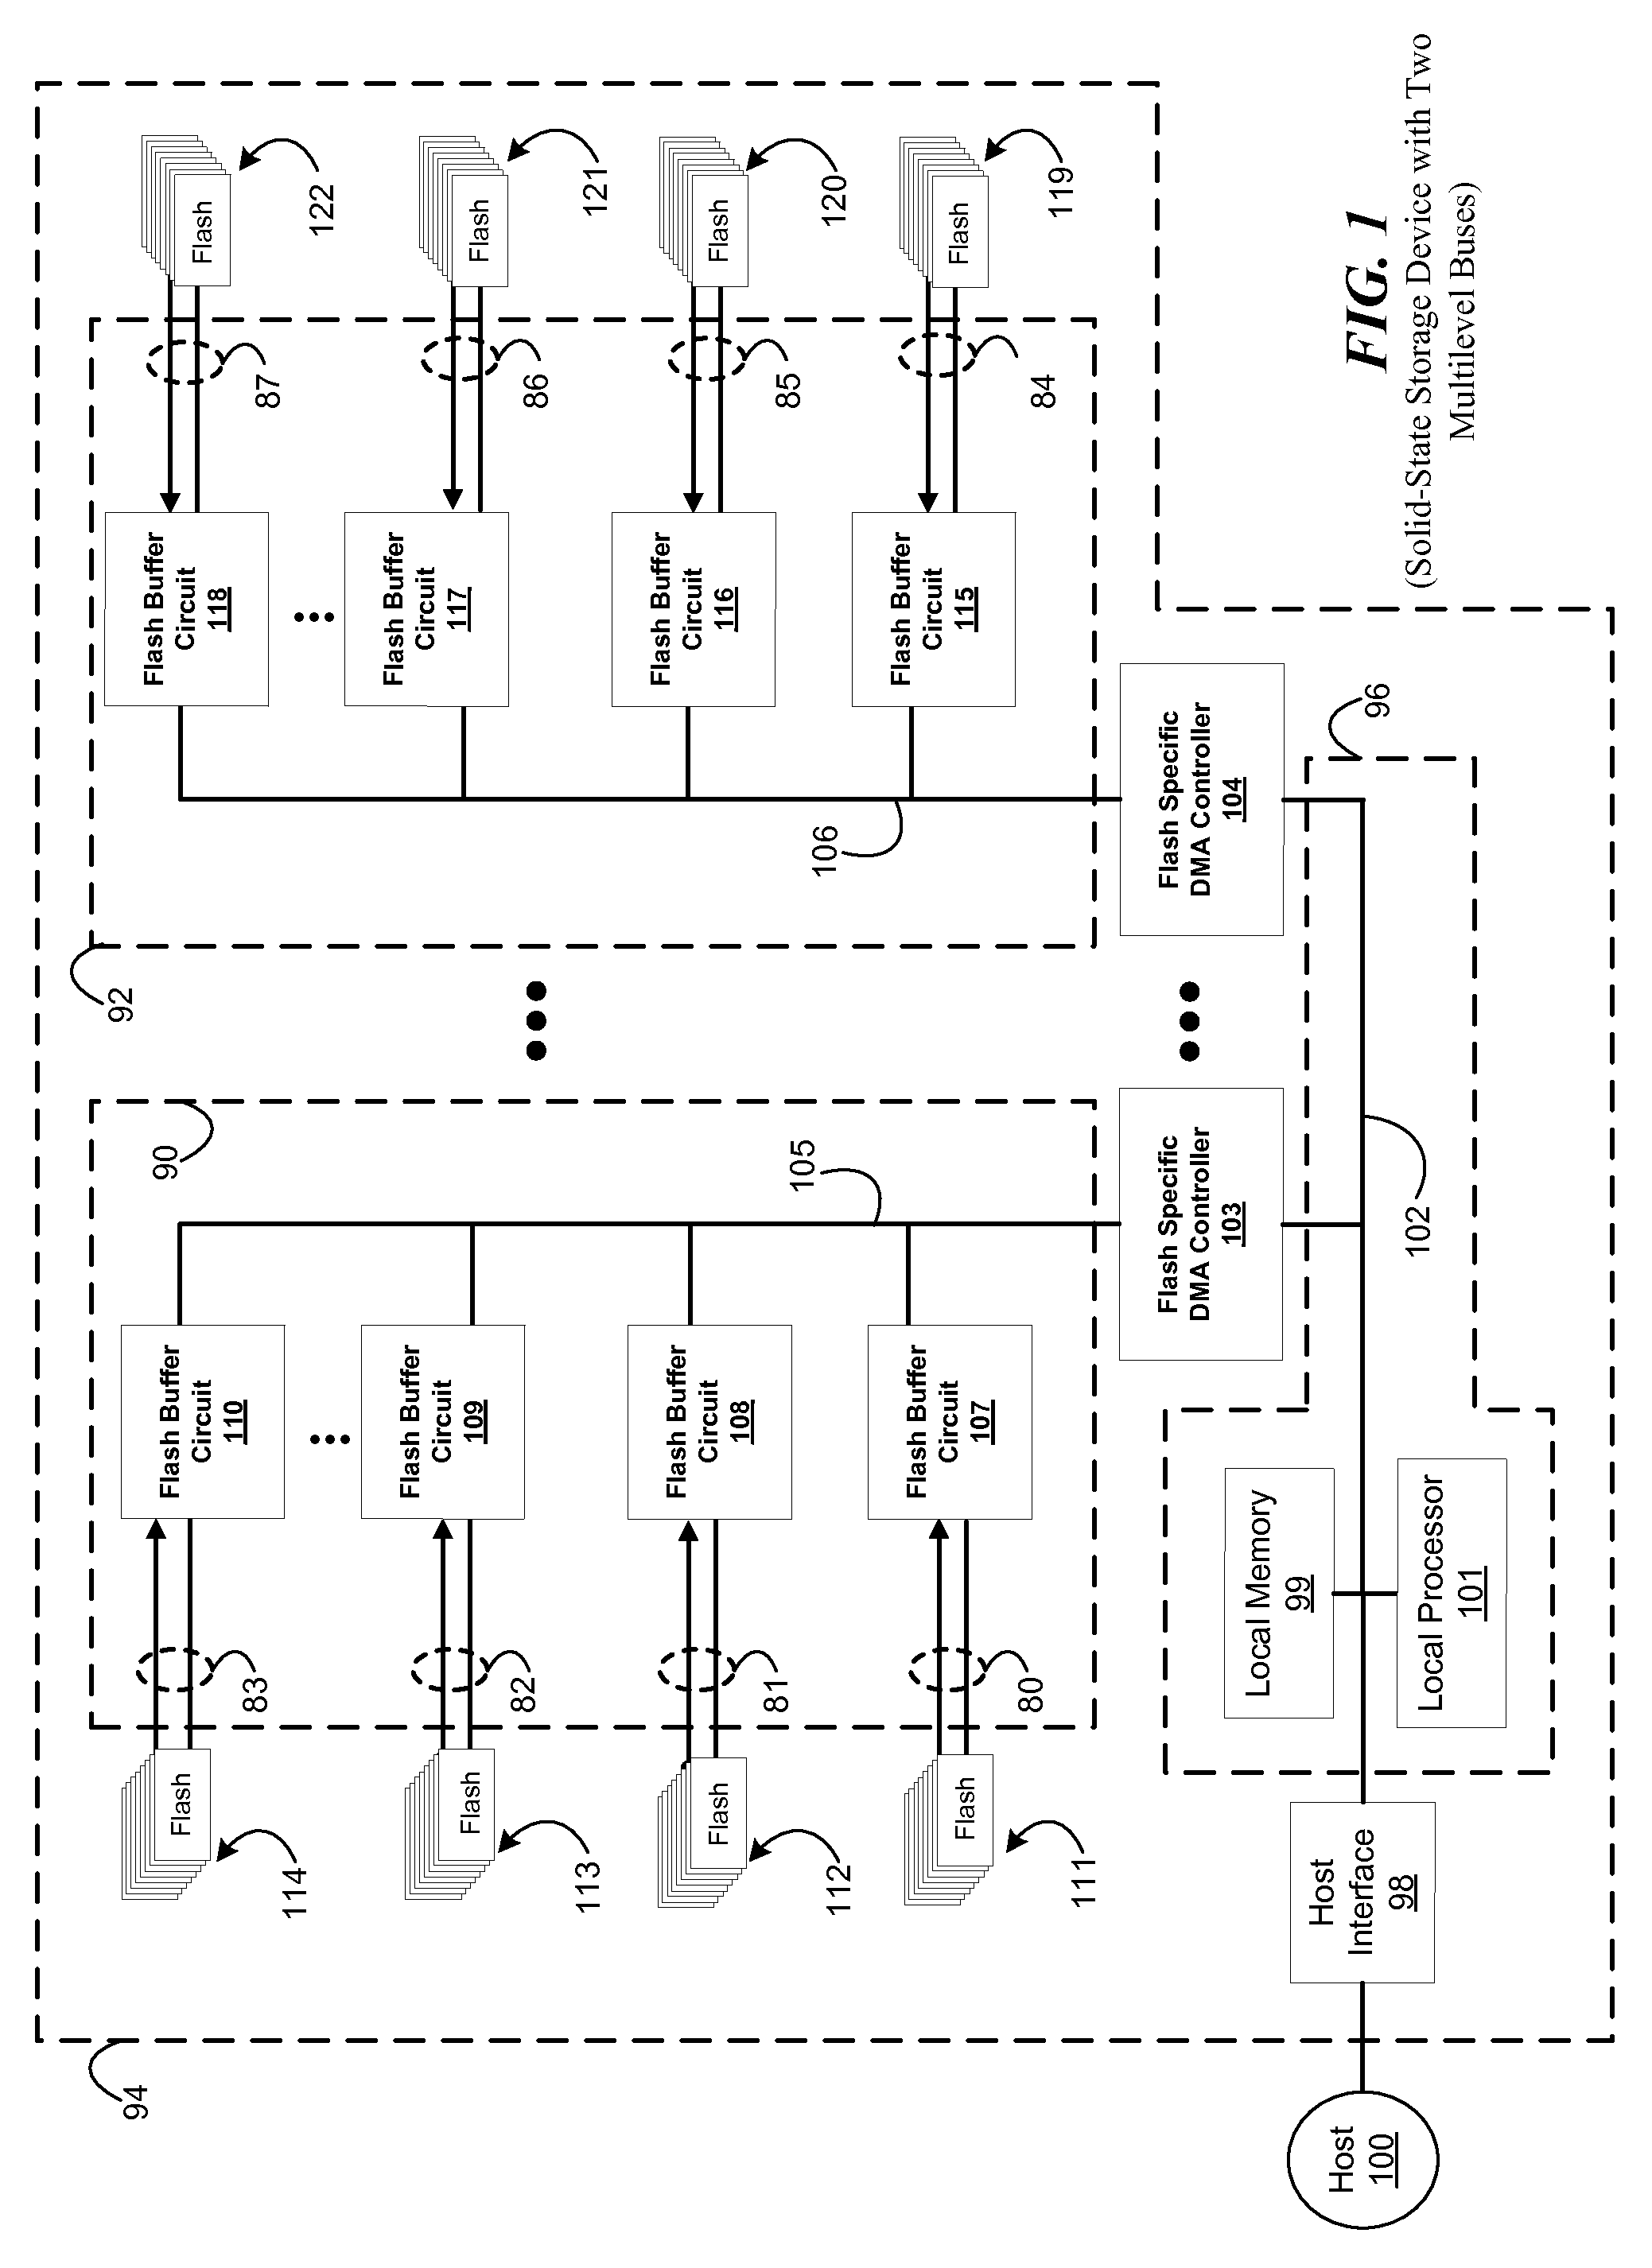 Multilevel memory bus system for solid-state mass storage